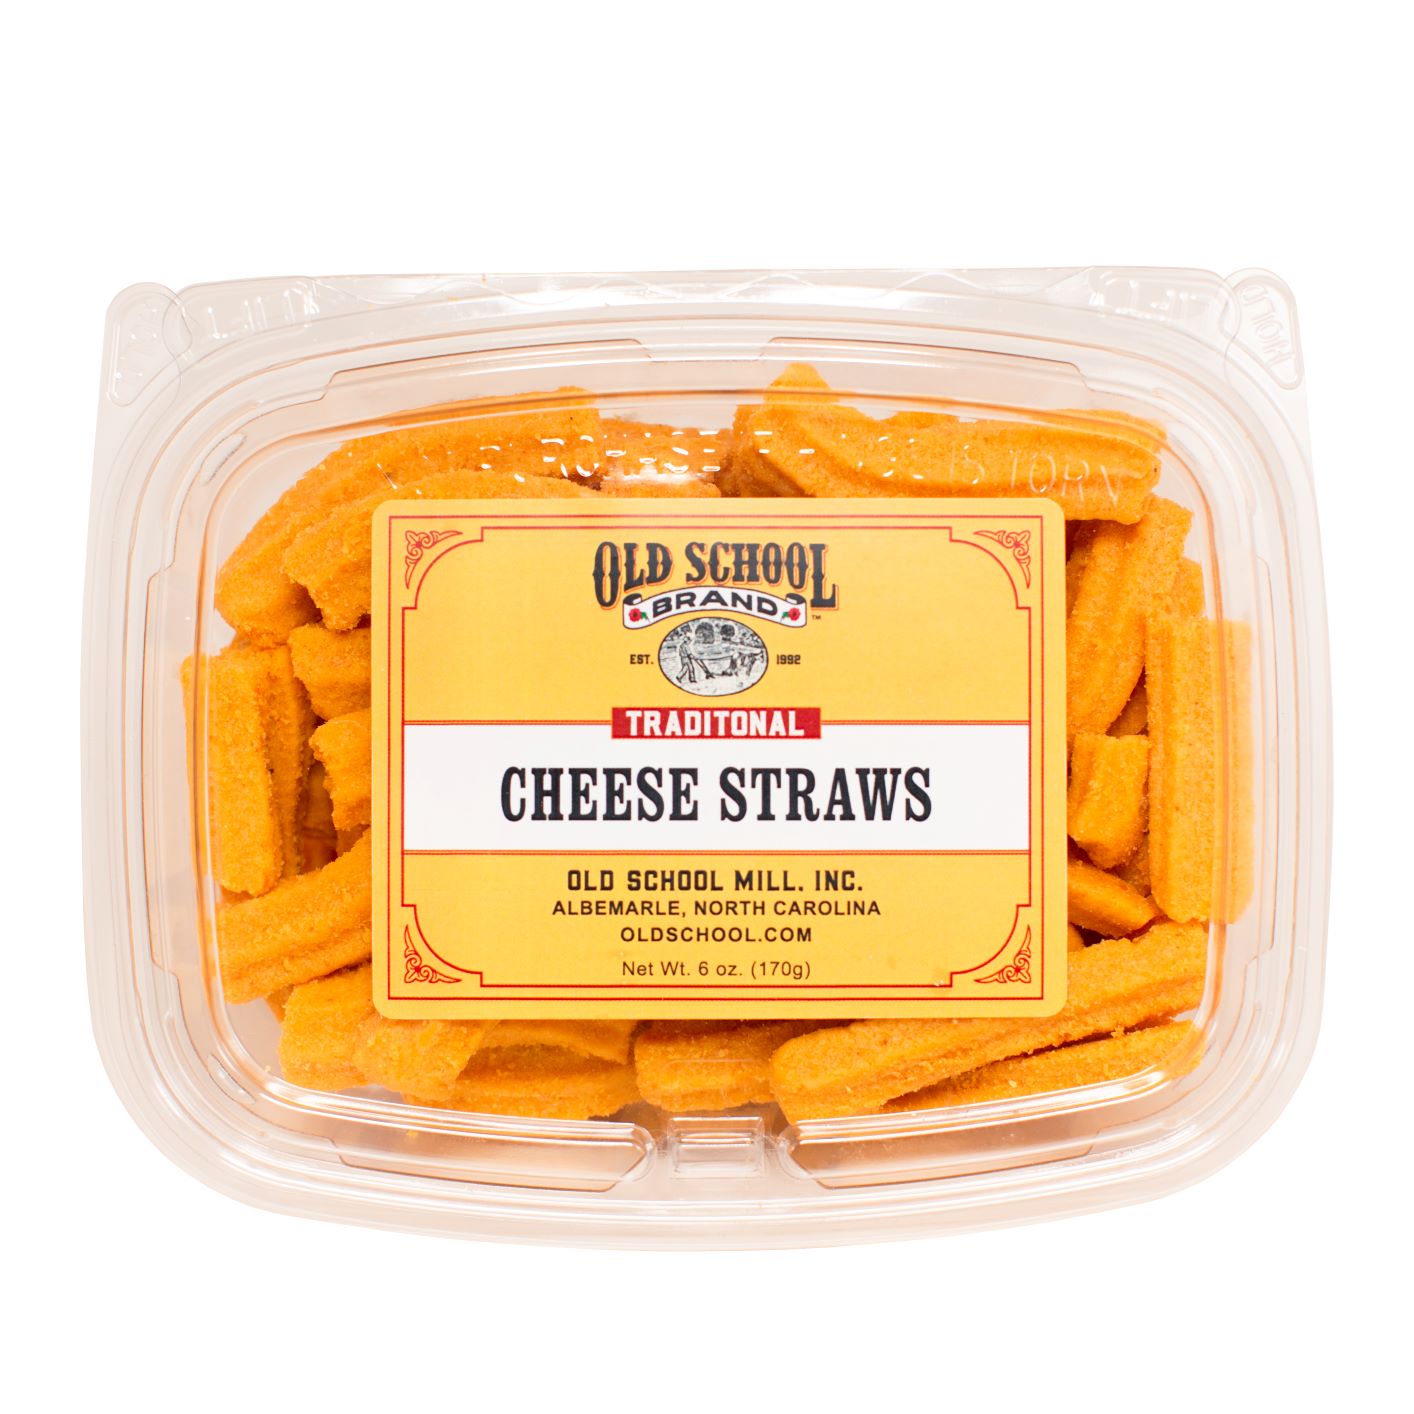 Traditional Cheese Straws – Old School Mill, Inc.